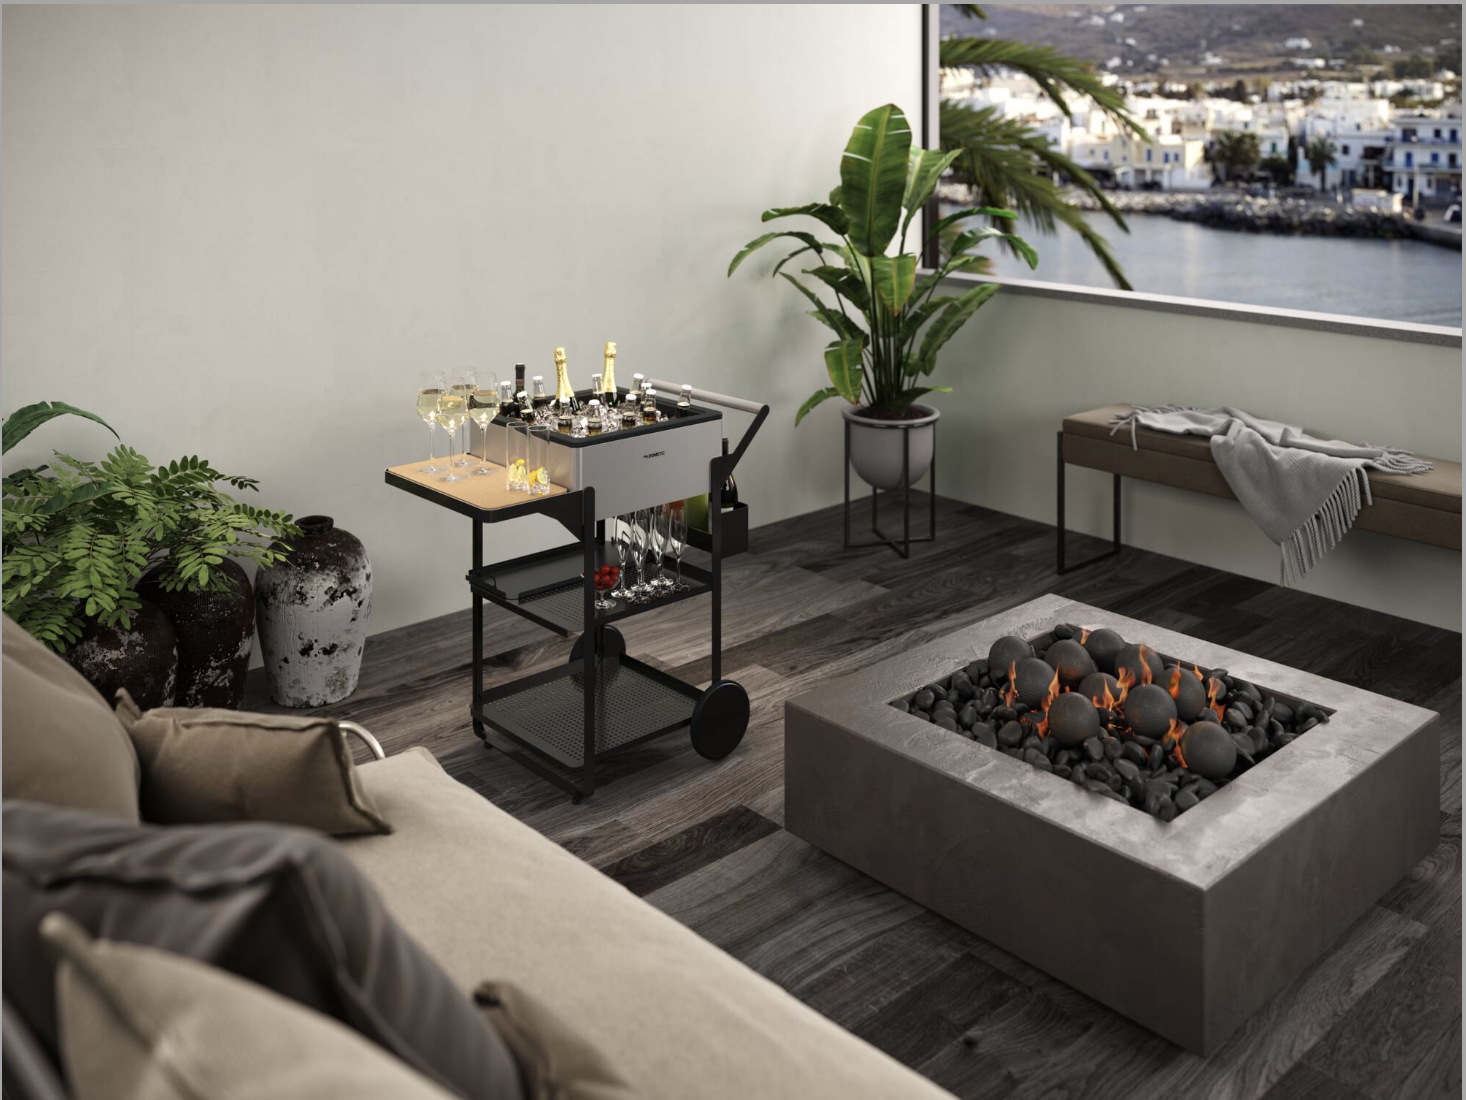 The compact Dometic MoBar 50 can fit on a terrace or balcony or at a pop-up event